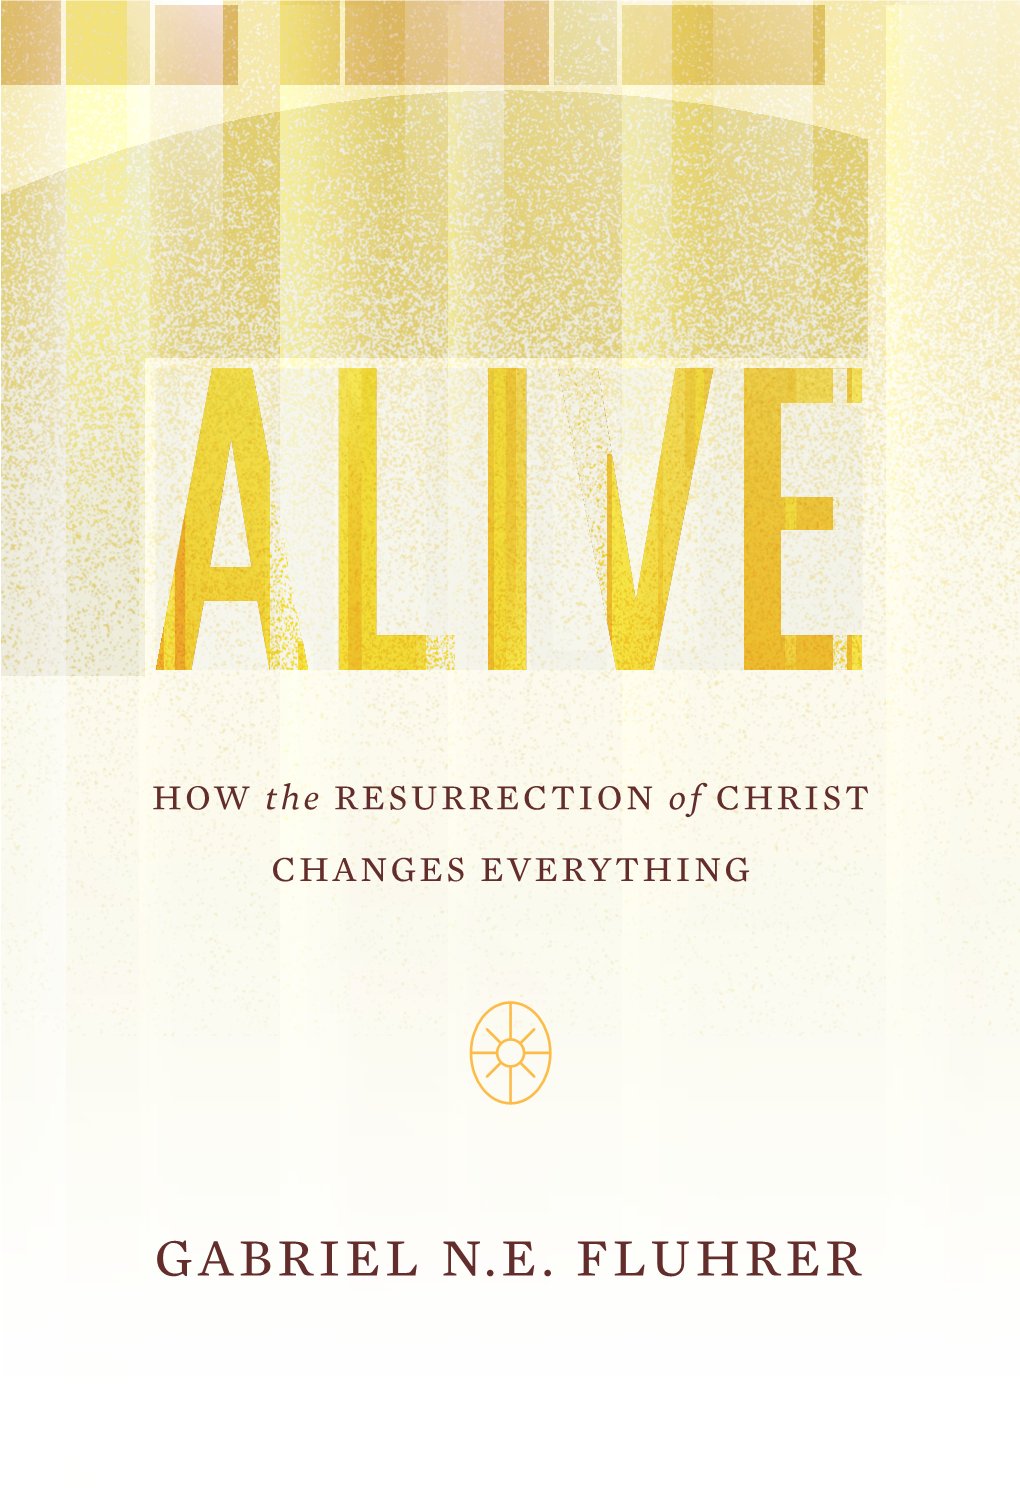 GABRIEL N.E. FLUHRER “If Christ Is Not Raised from the Dead, Then Our Faith Is Worthless (1 Cor